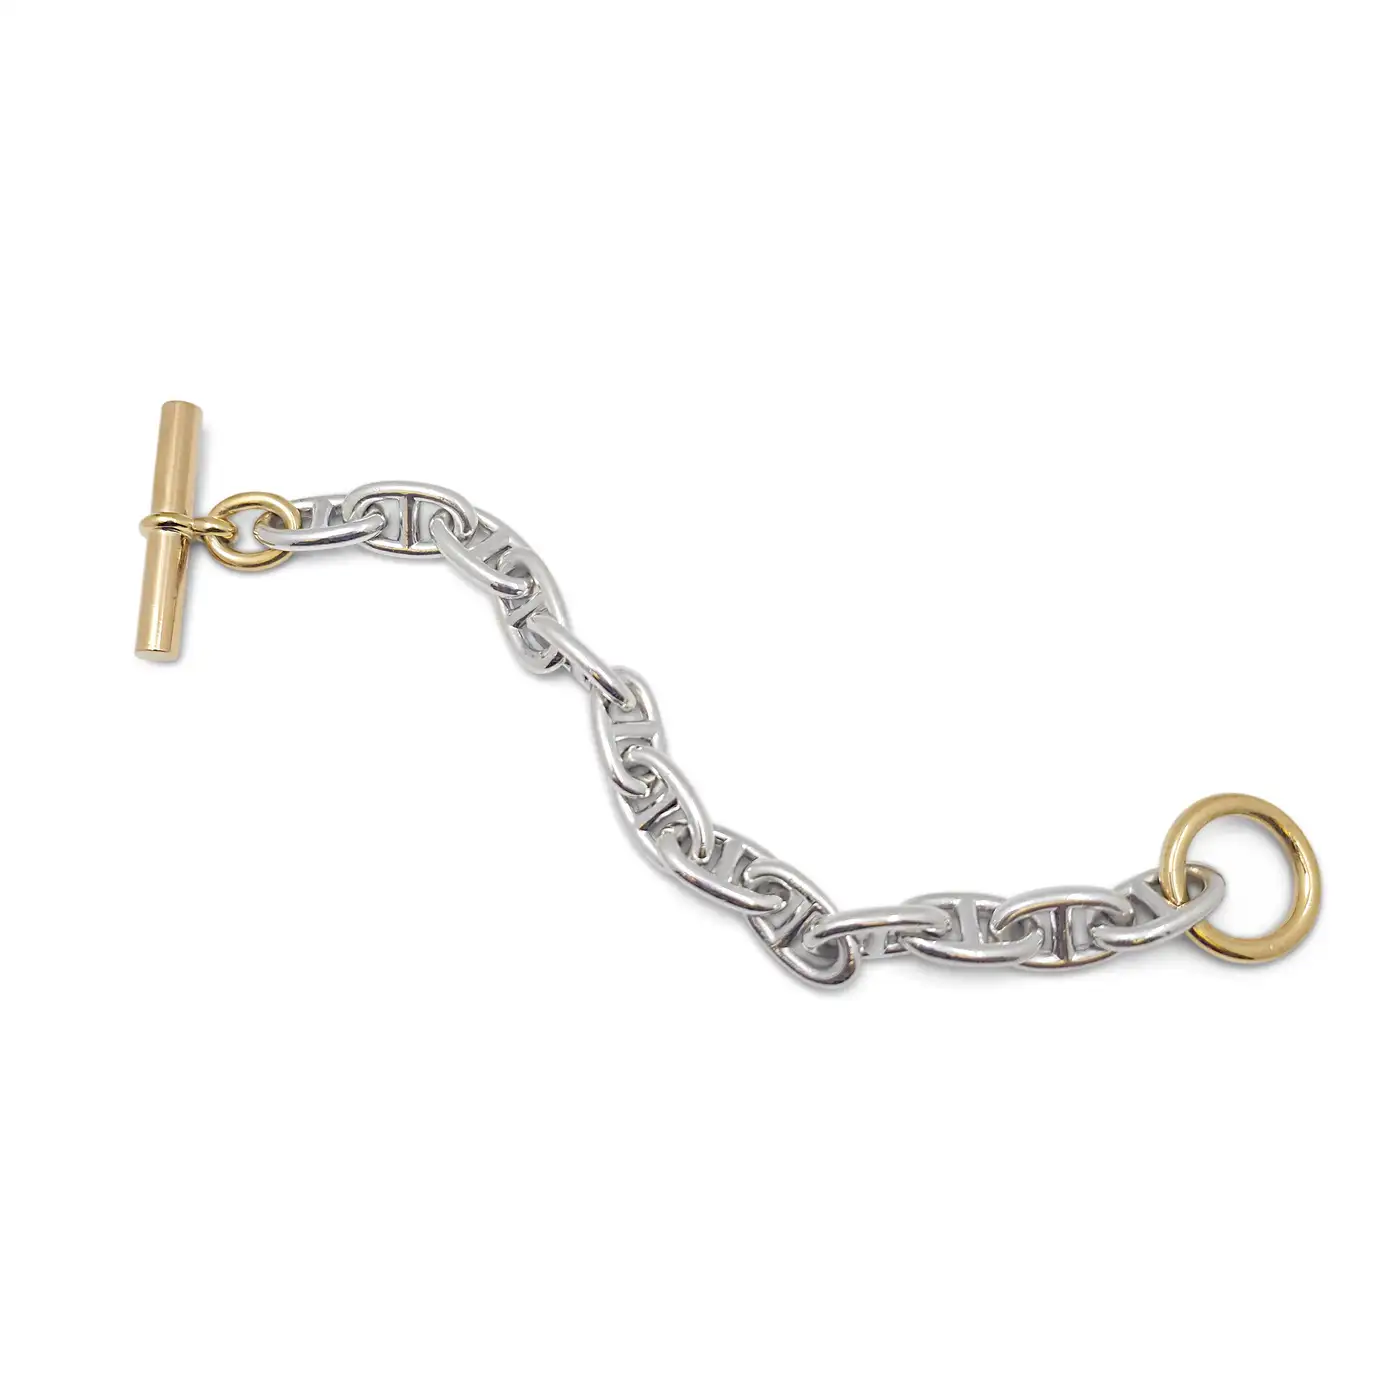 Hermes-Chaine-dAncre-Silver-and-Gold-Bracelet-6.webp